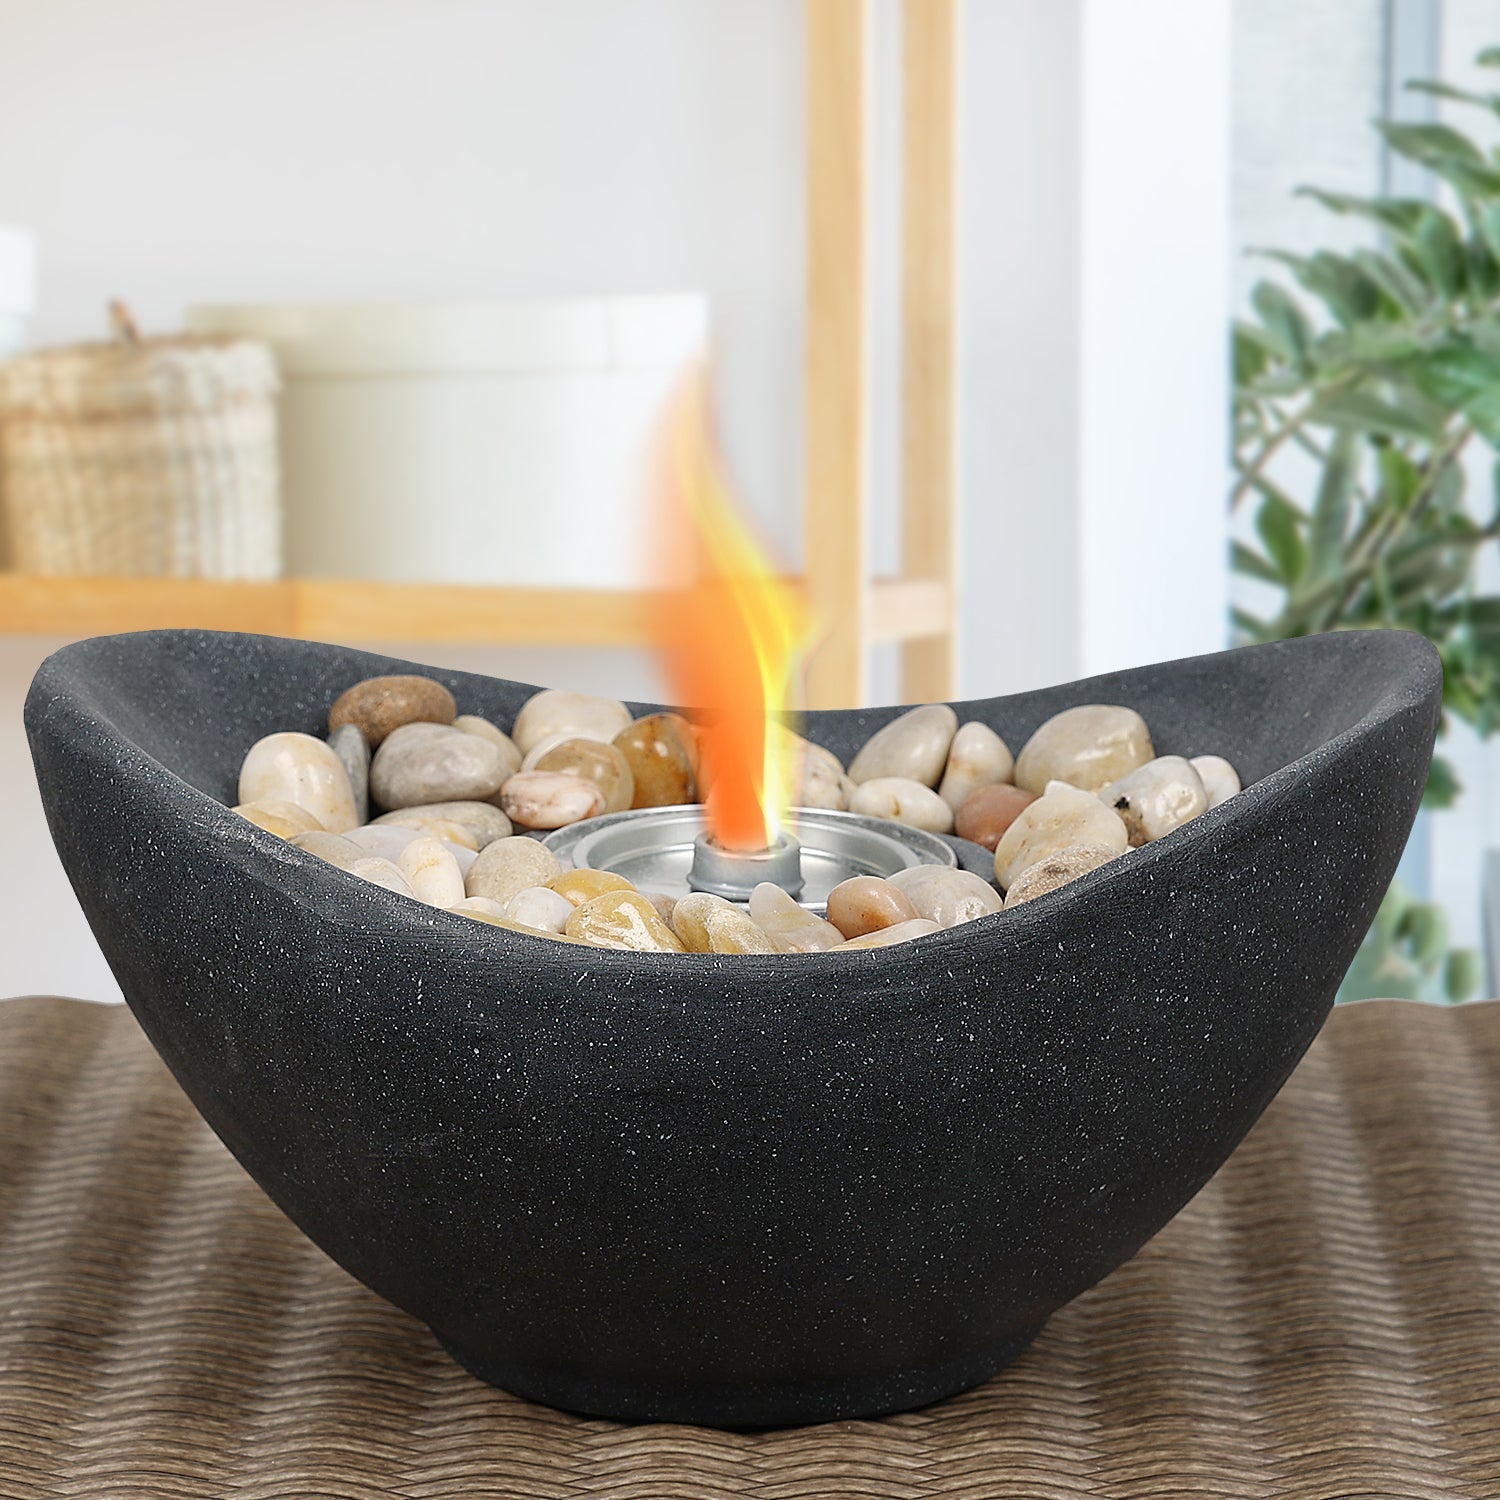 Portable Concrete Fire Pit - Indoor/Outdoor Tabletop Fireplace for